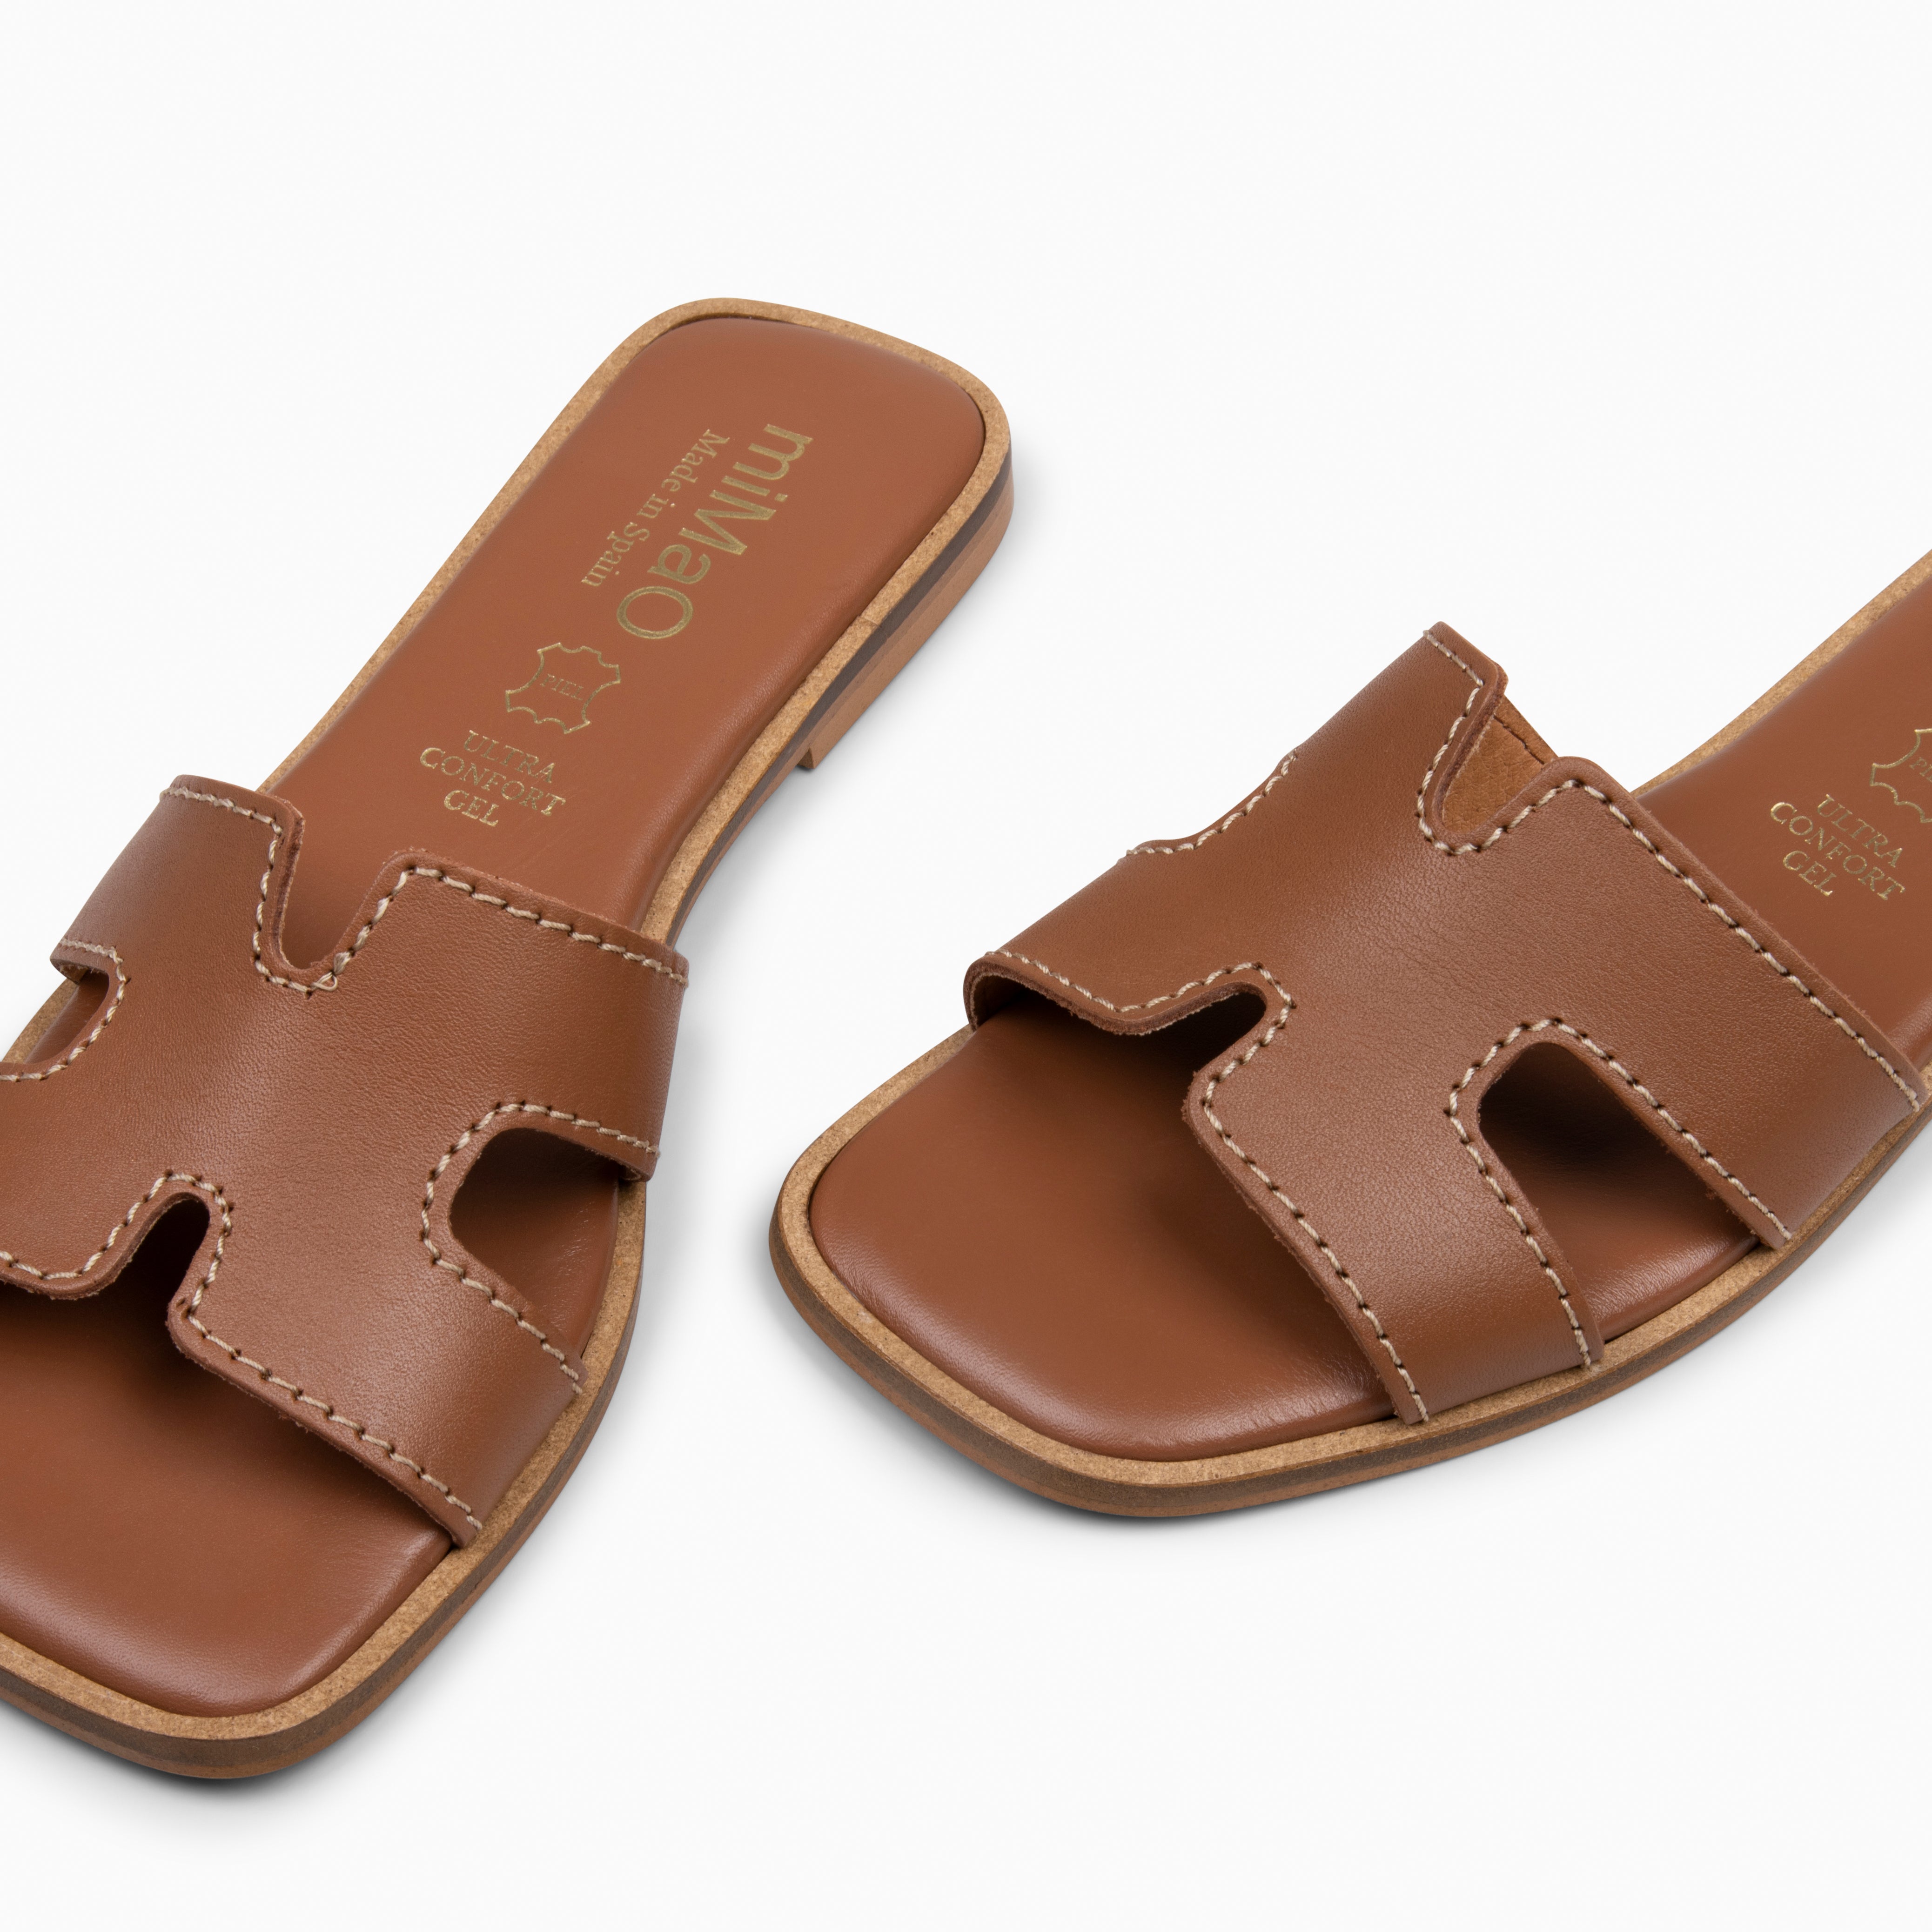 LUXOR – LEATHER Flat Sandals